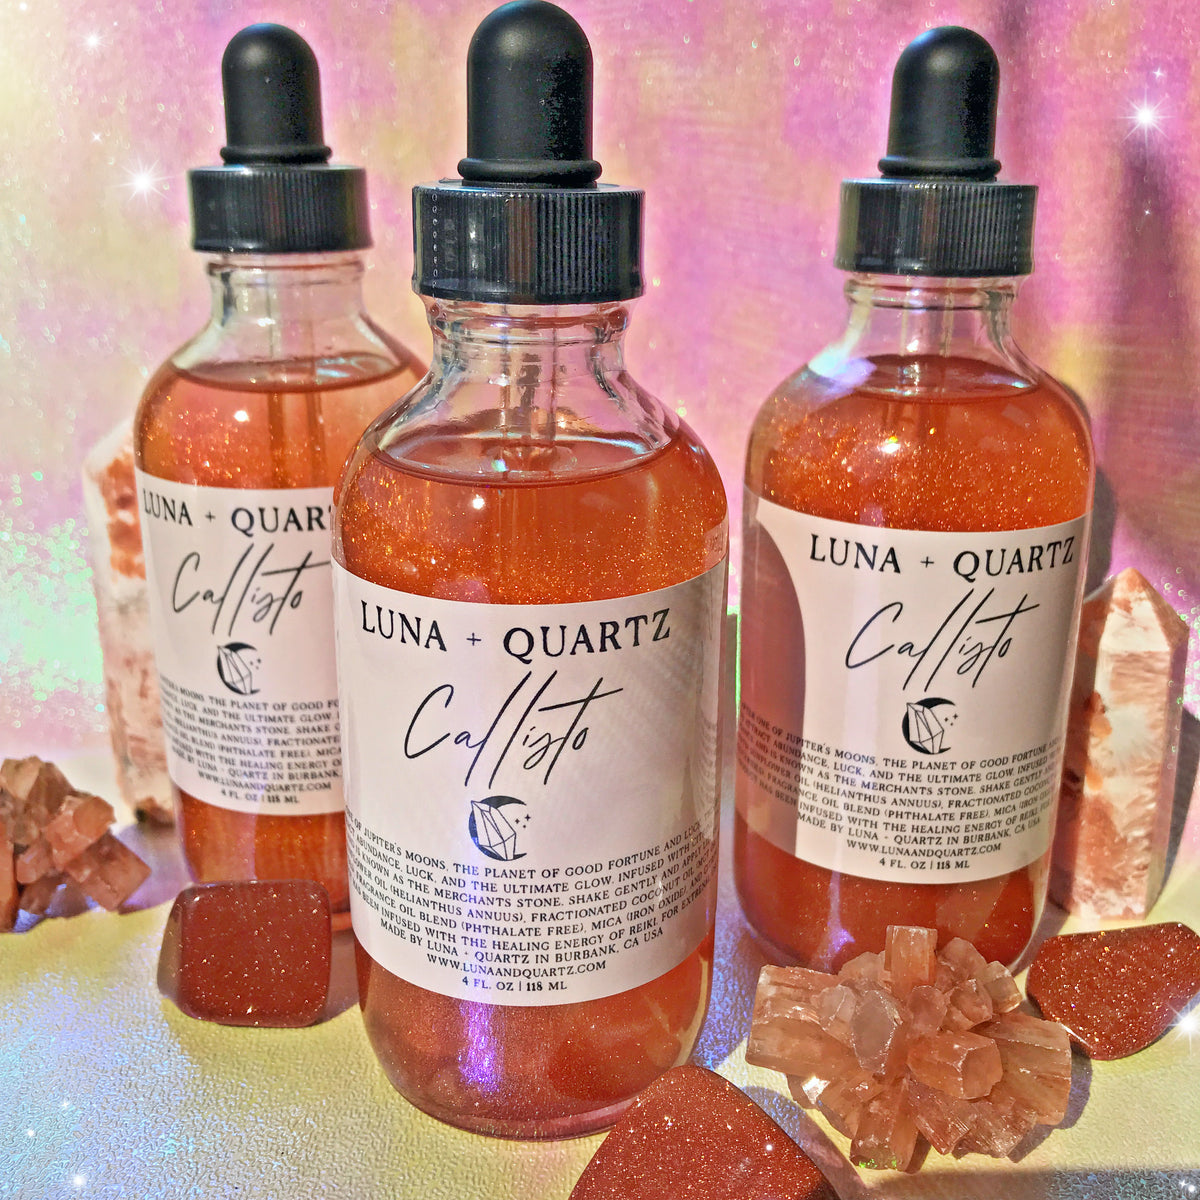 Callisto Crystal Infused Body Oil